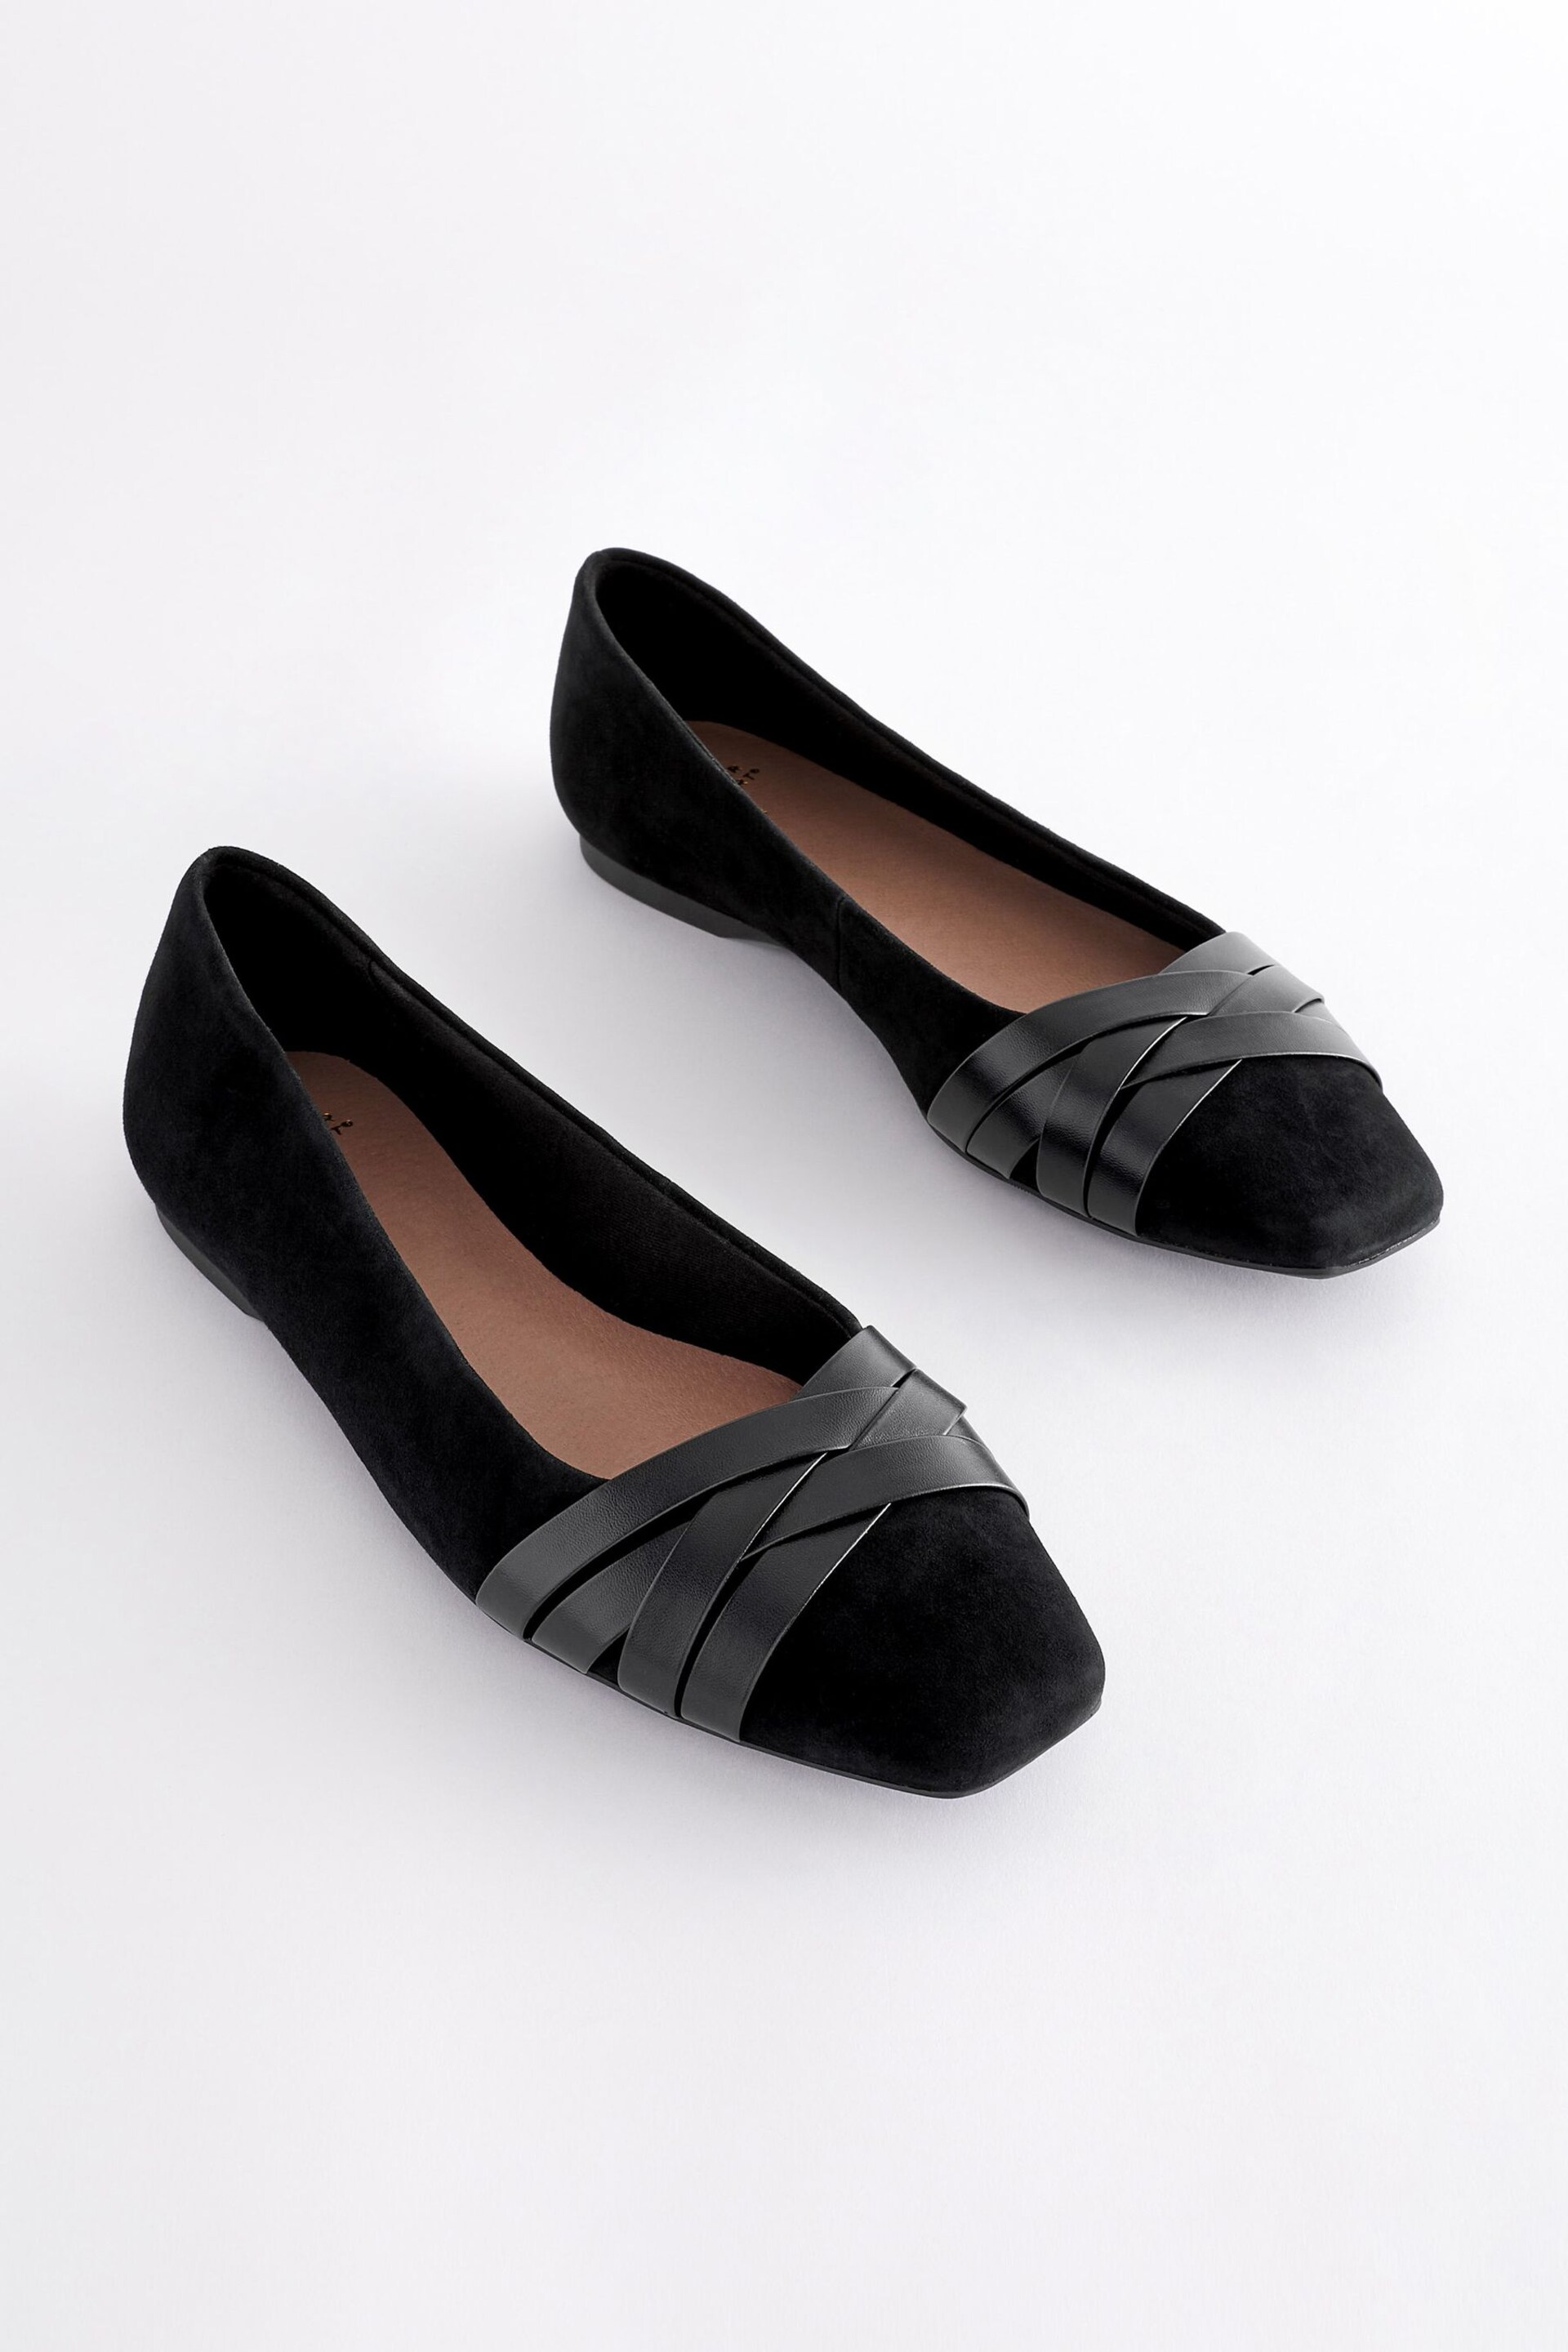 Black Forever Comfort® Leather Square Toe Ballerina Shoes - Image 1 of 5